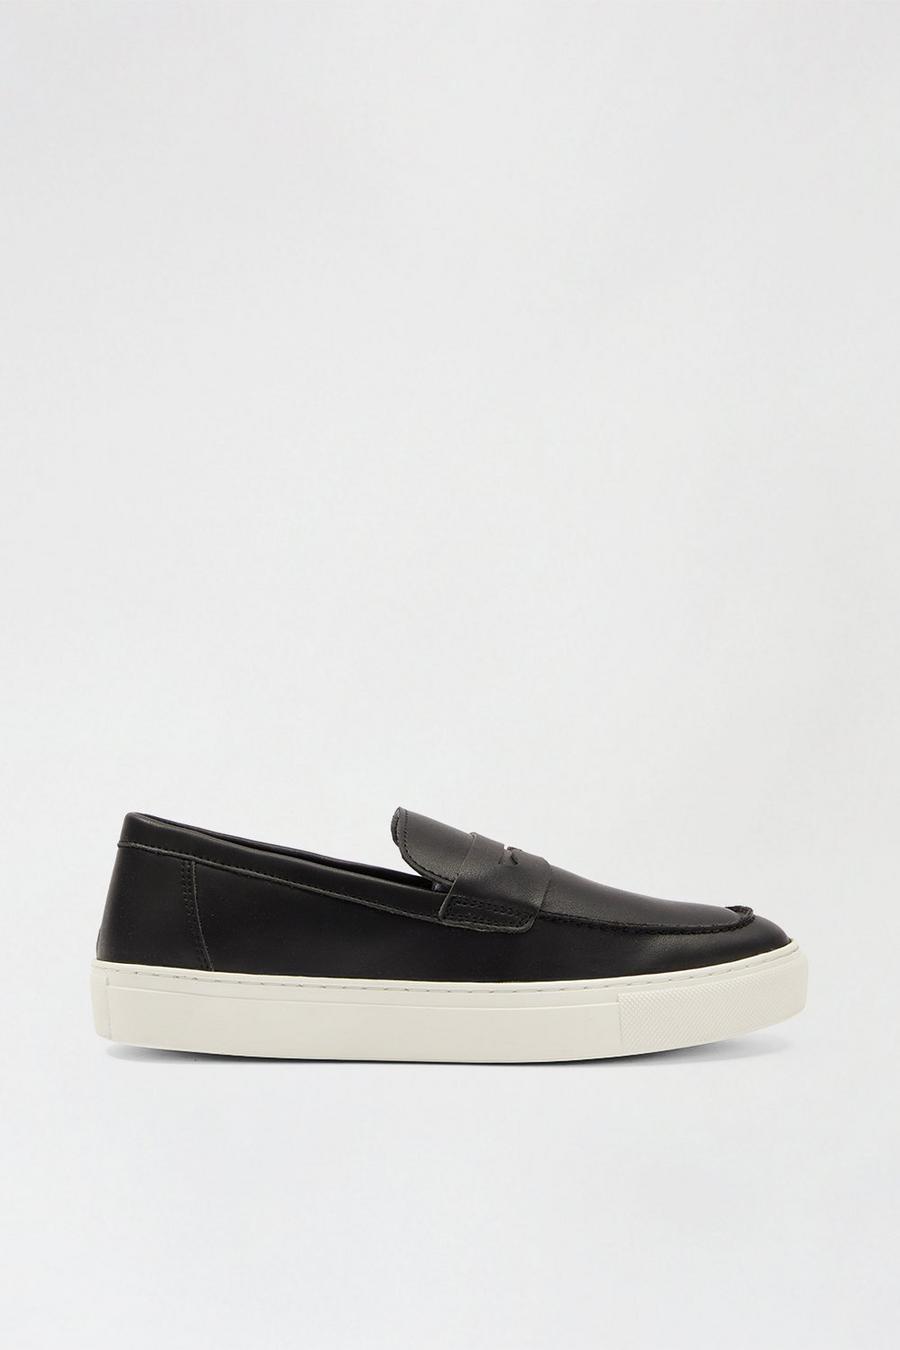 Black Slip On Shoes With Band Detail